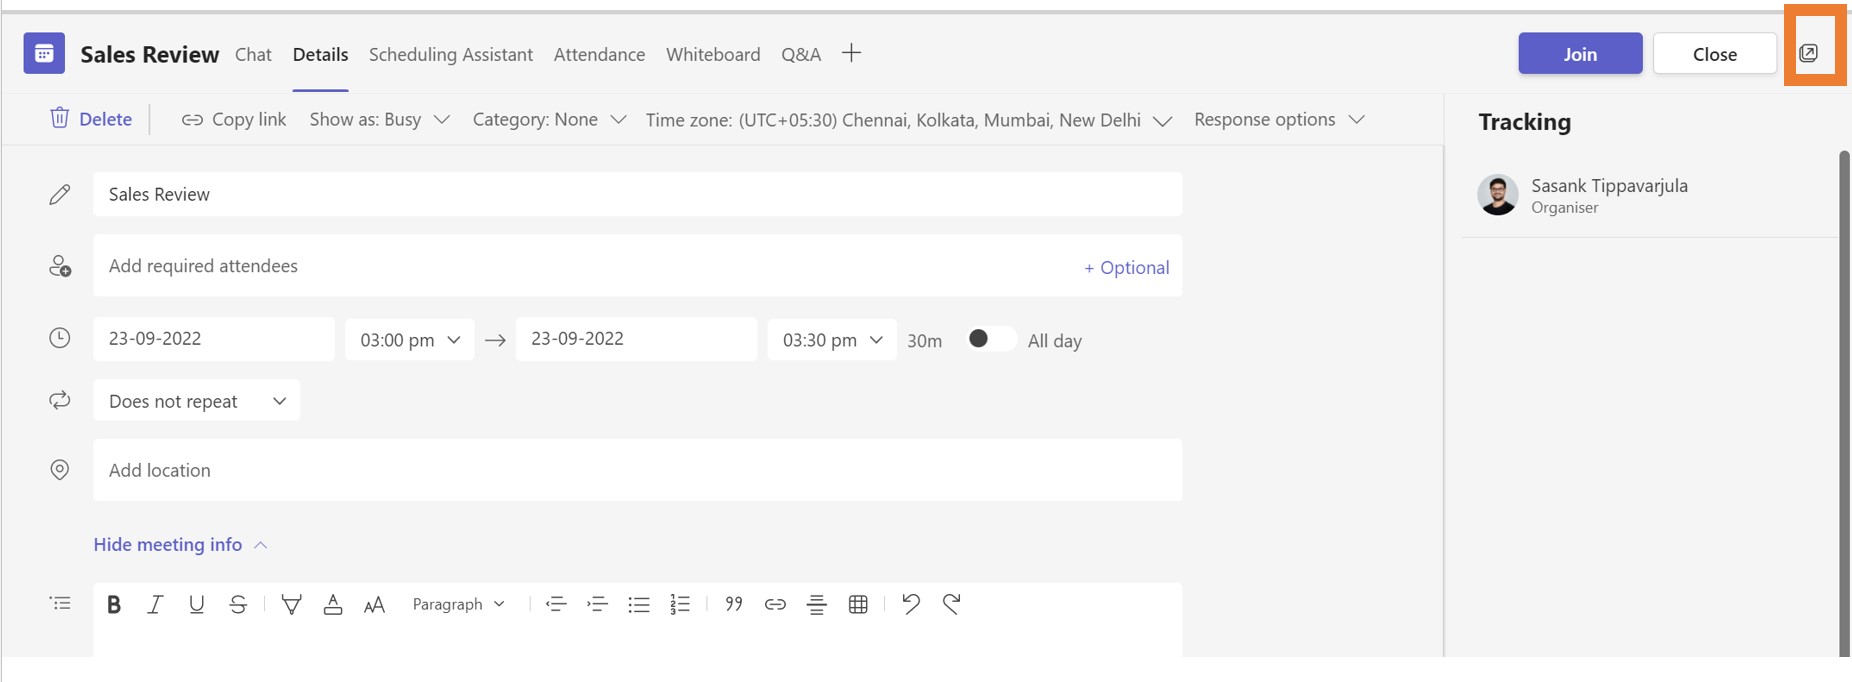 Existing meetings can also now be popped out by clicking on the icon on the scheduling form.